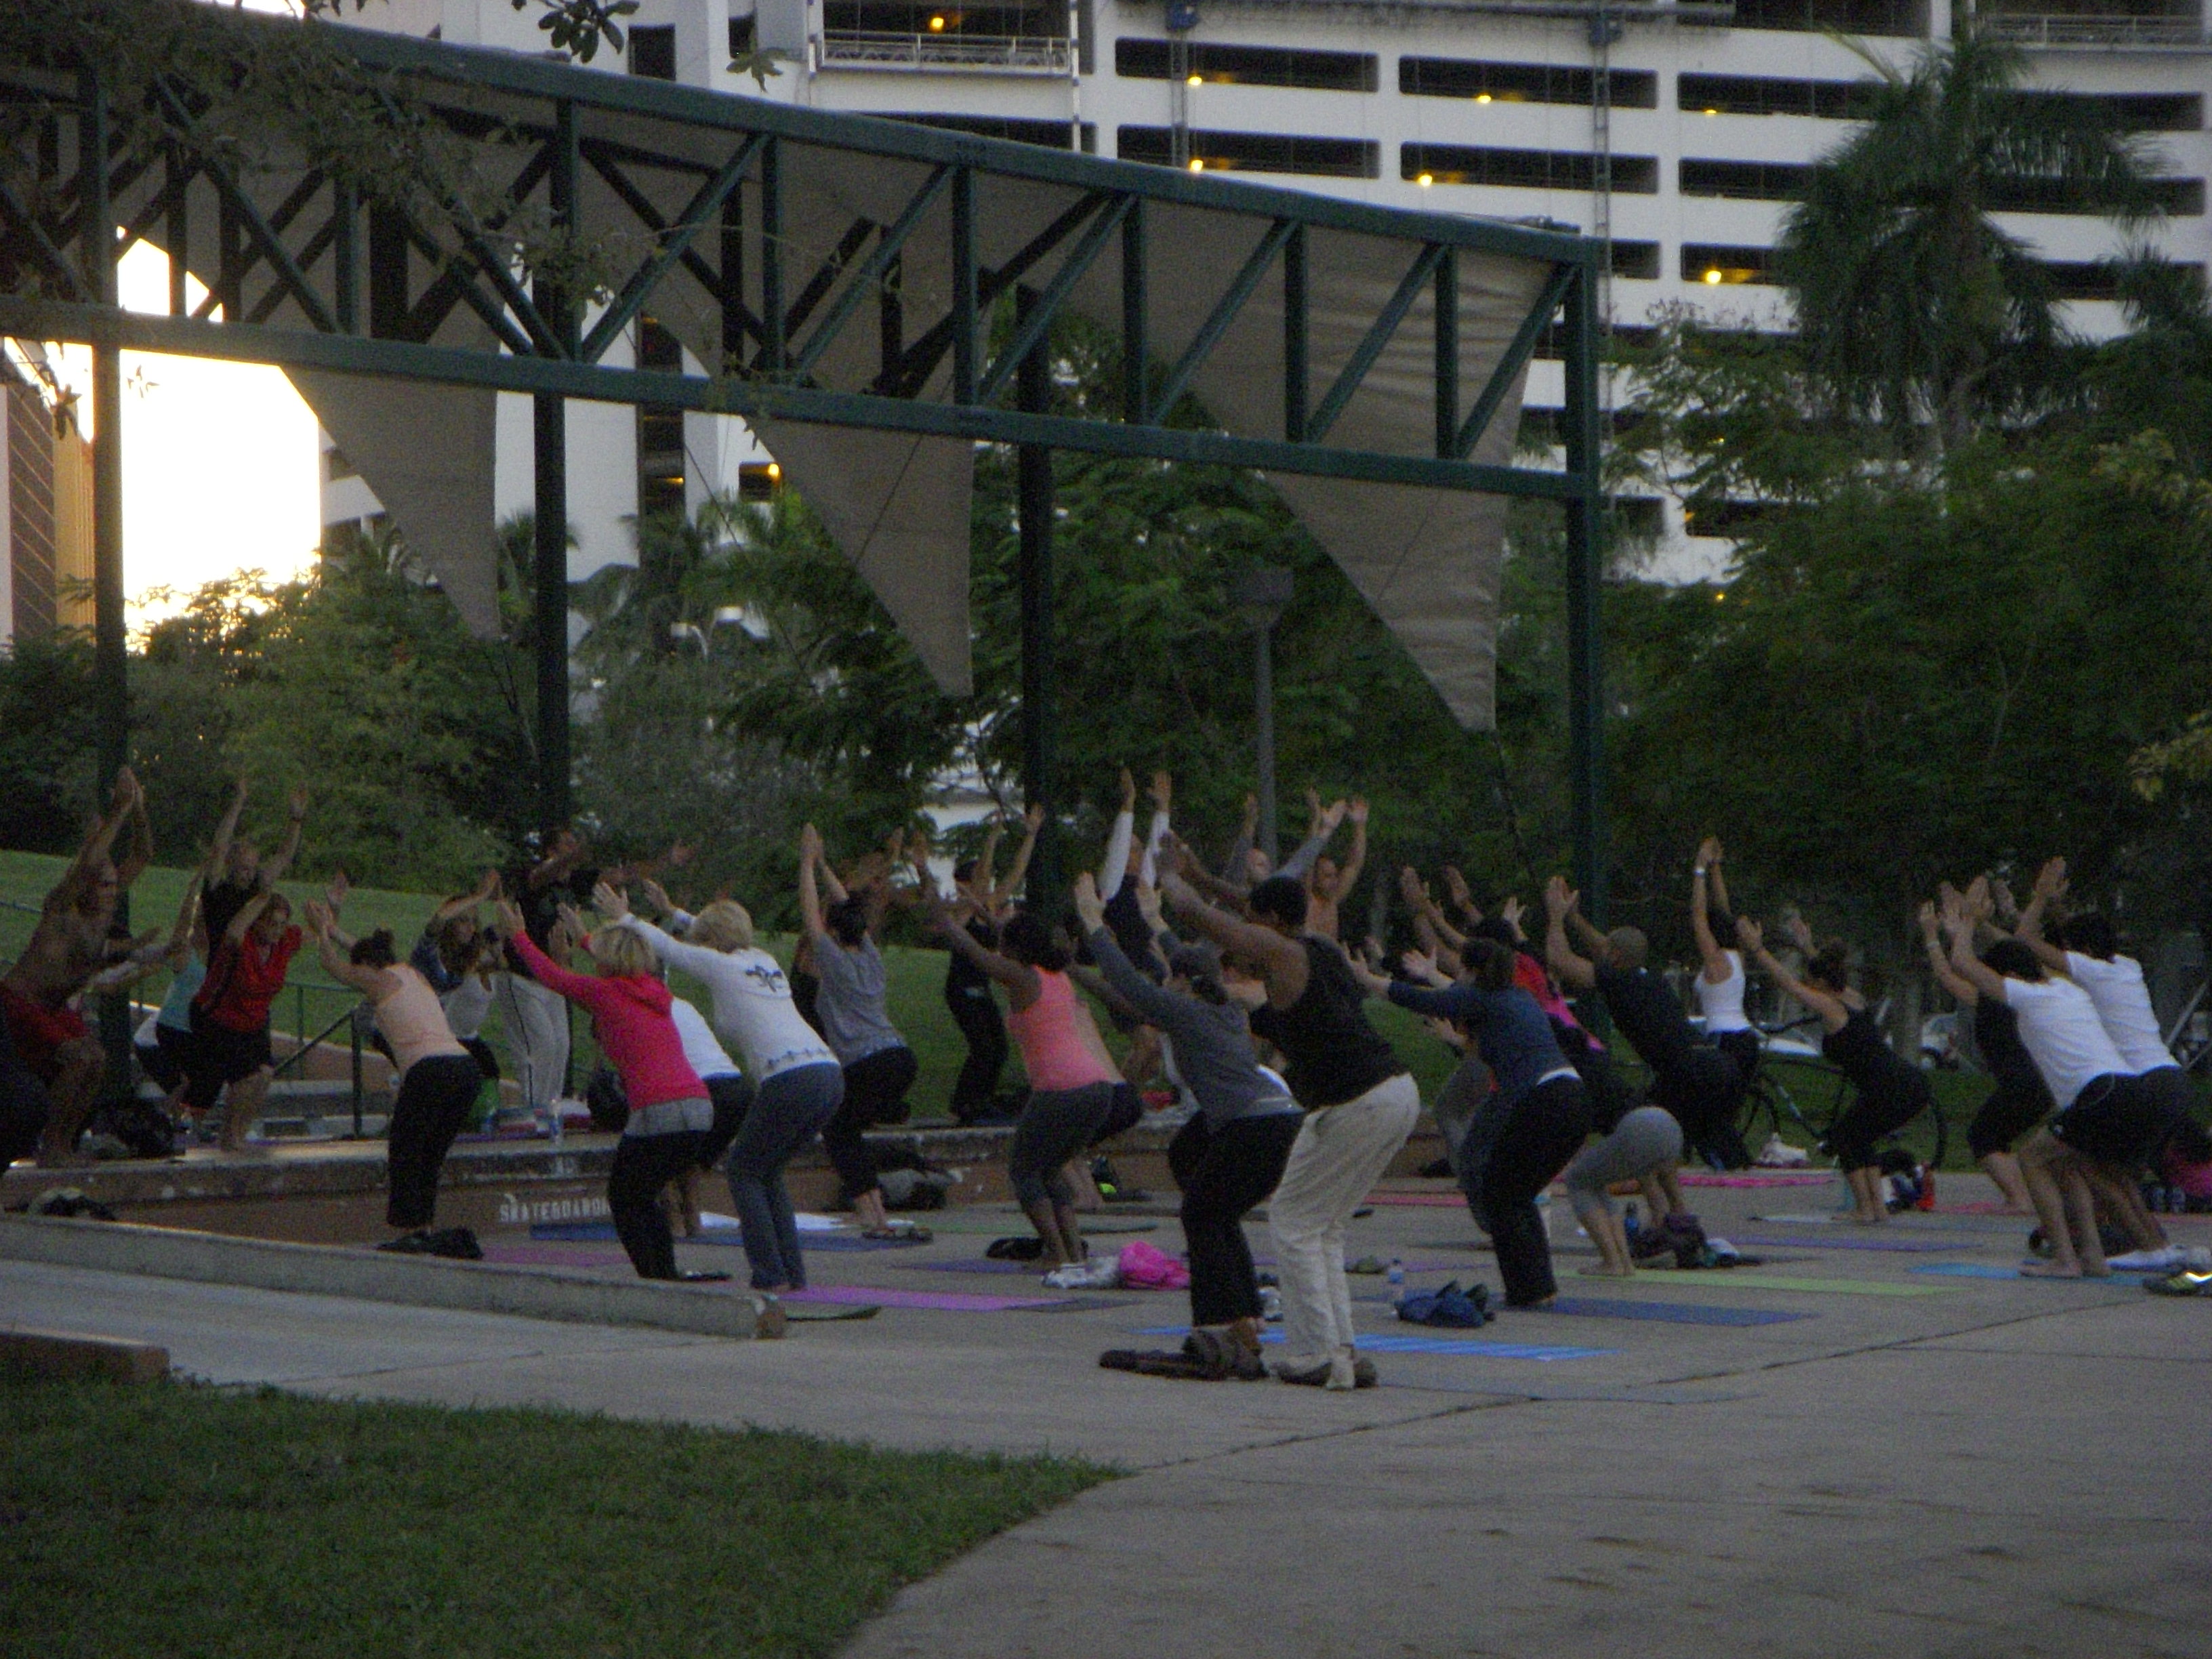 Locals, tourists and first-time yogis head on over to Tina Hills Pavilion in Bayfront Park for free yoga (Photo by Laurie Charles).